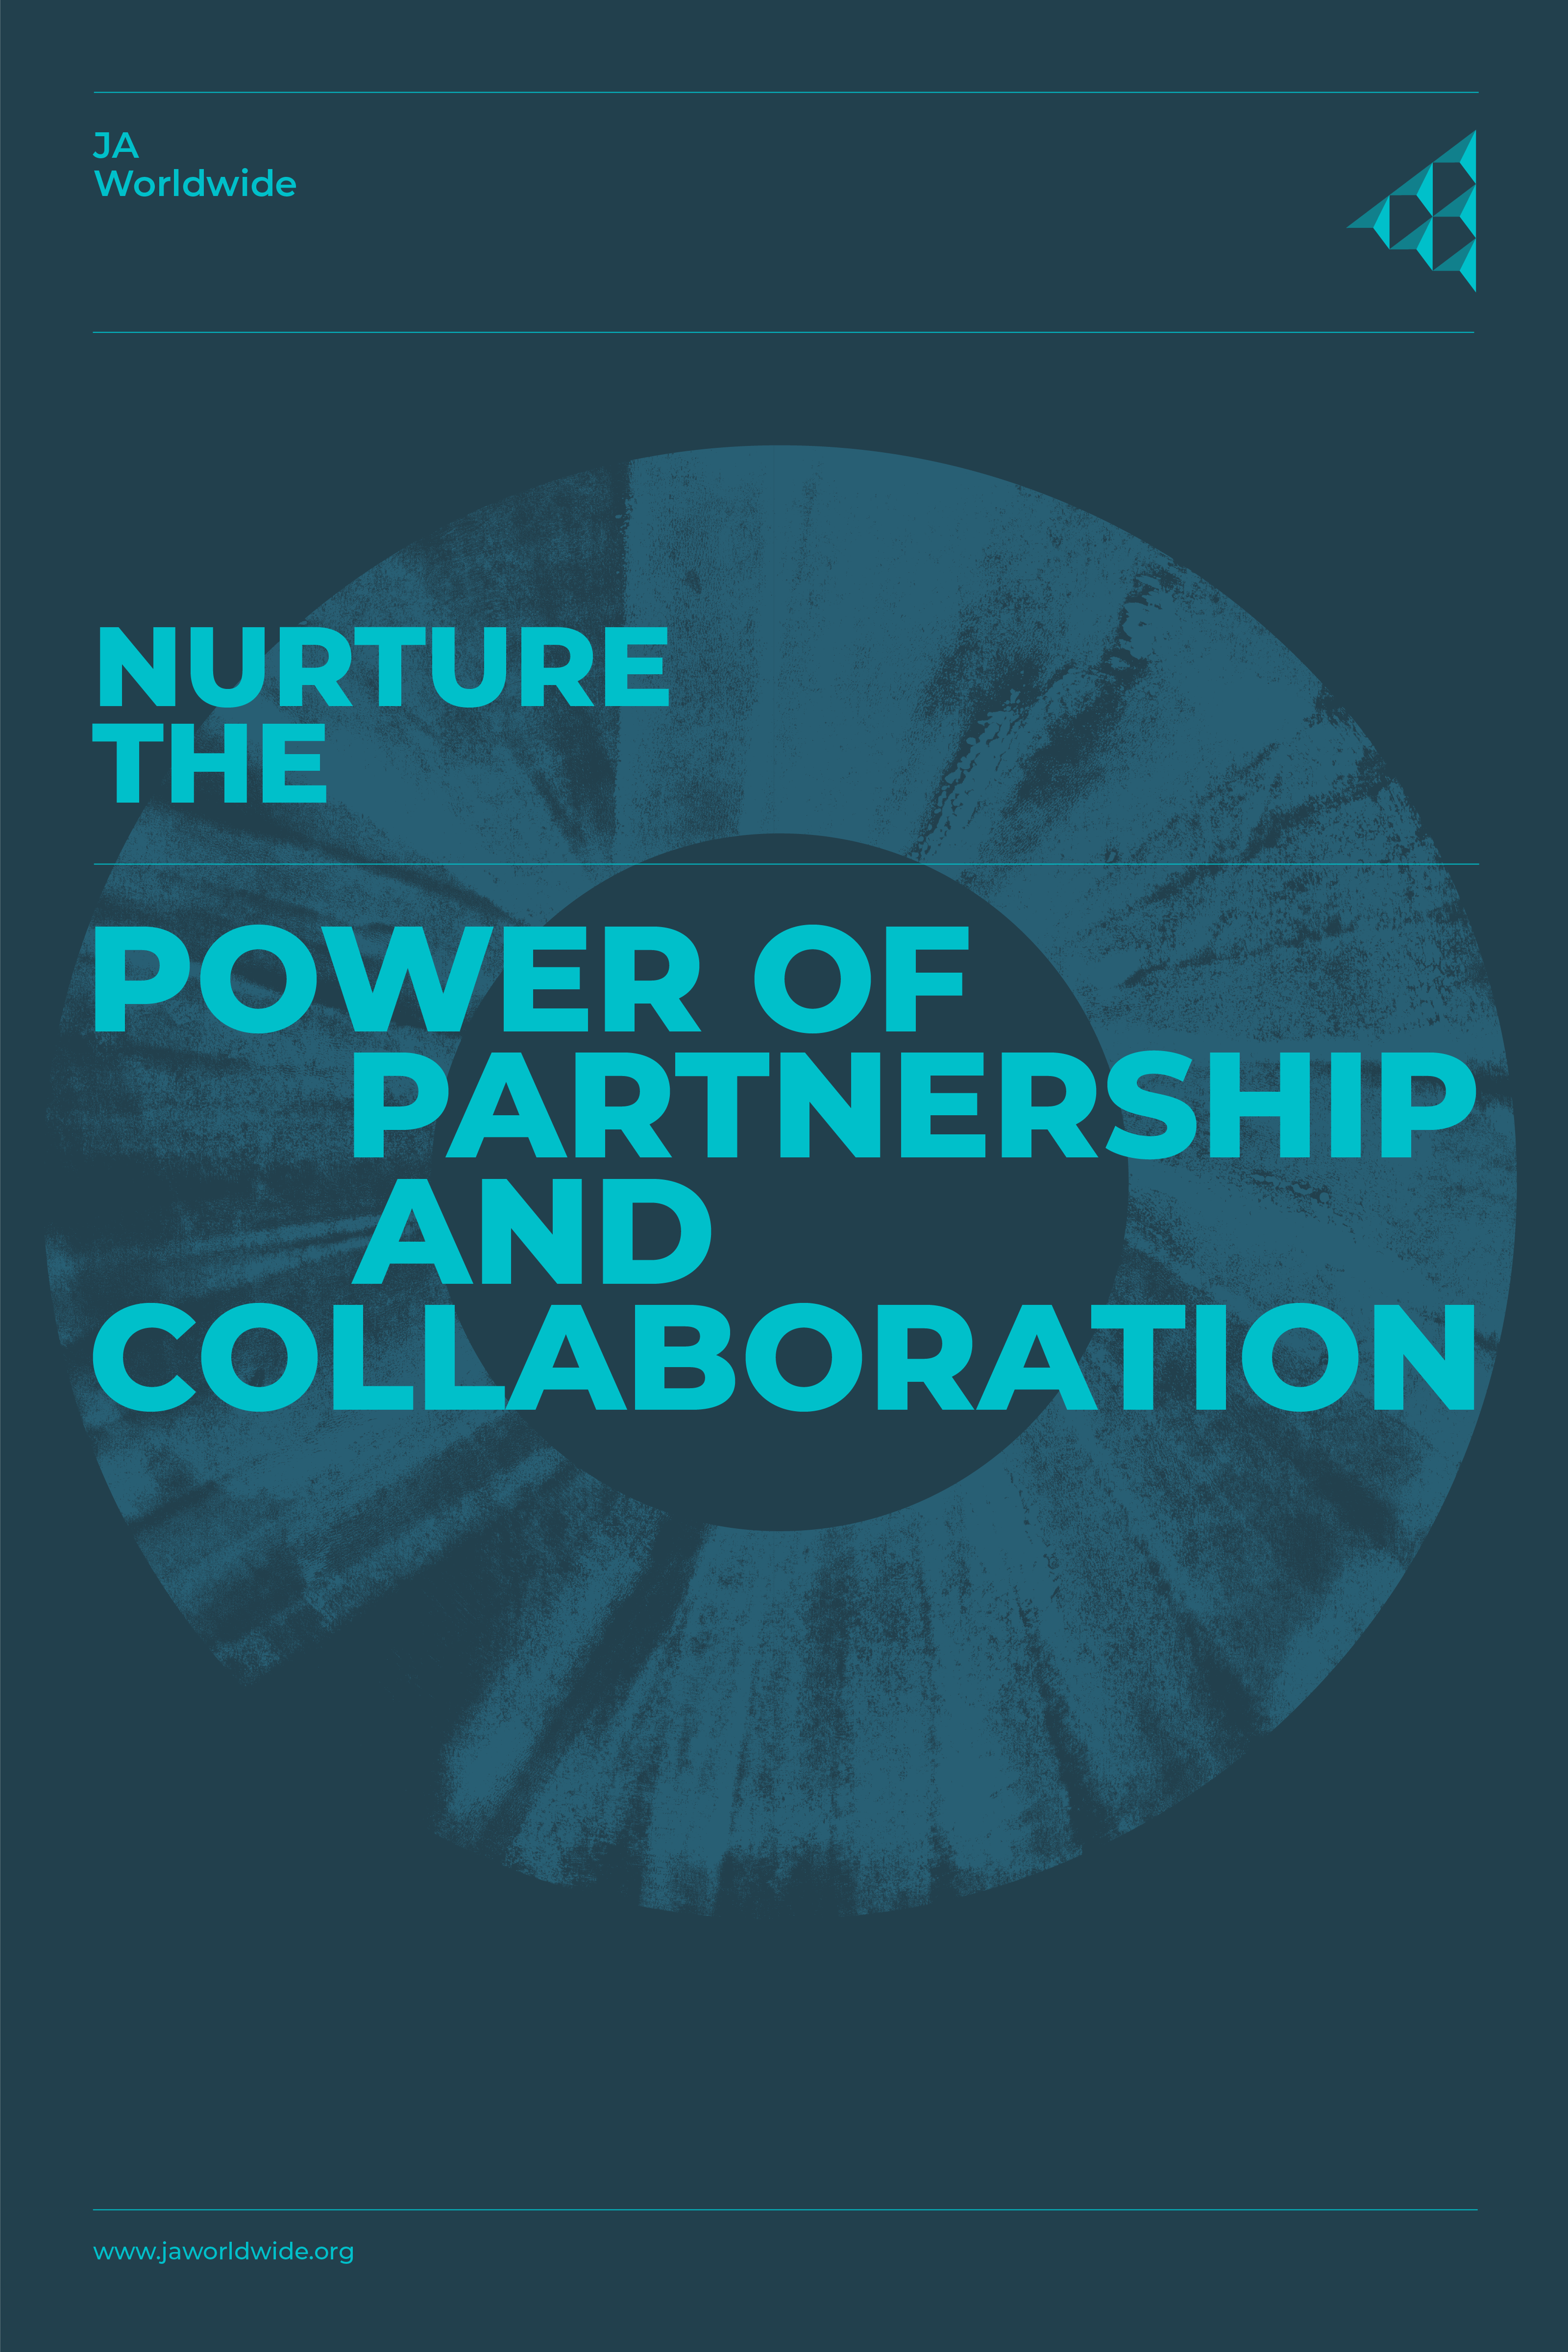 Nurture the power of partnership and collaboration